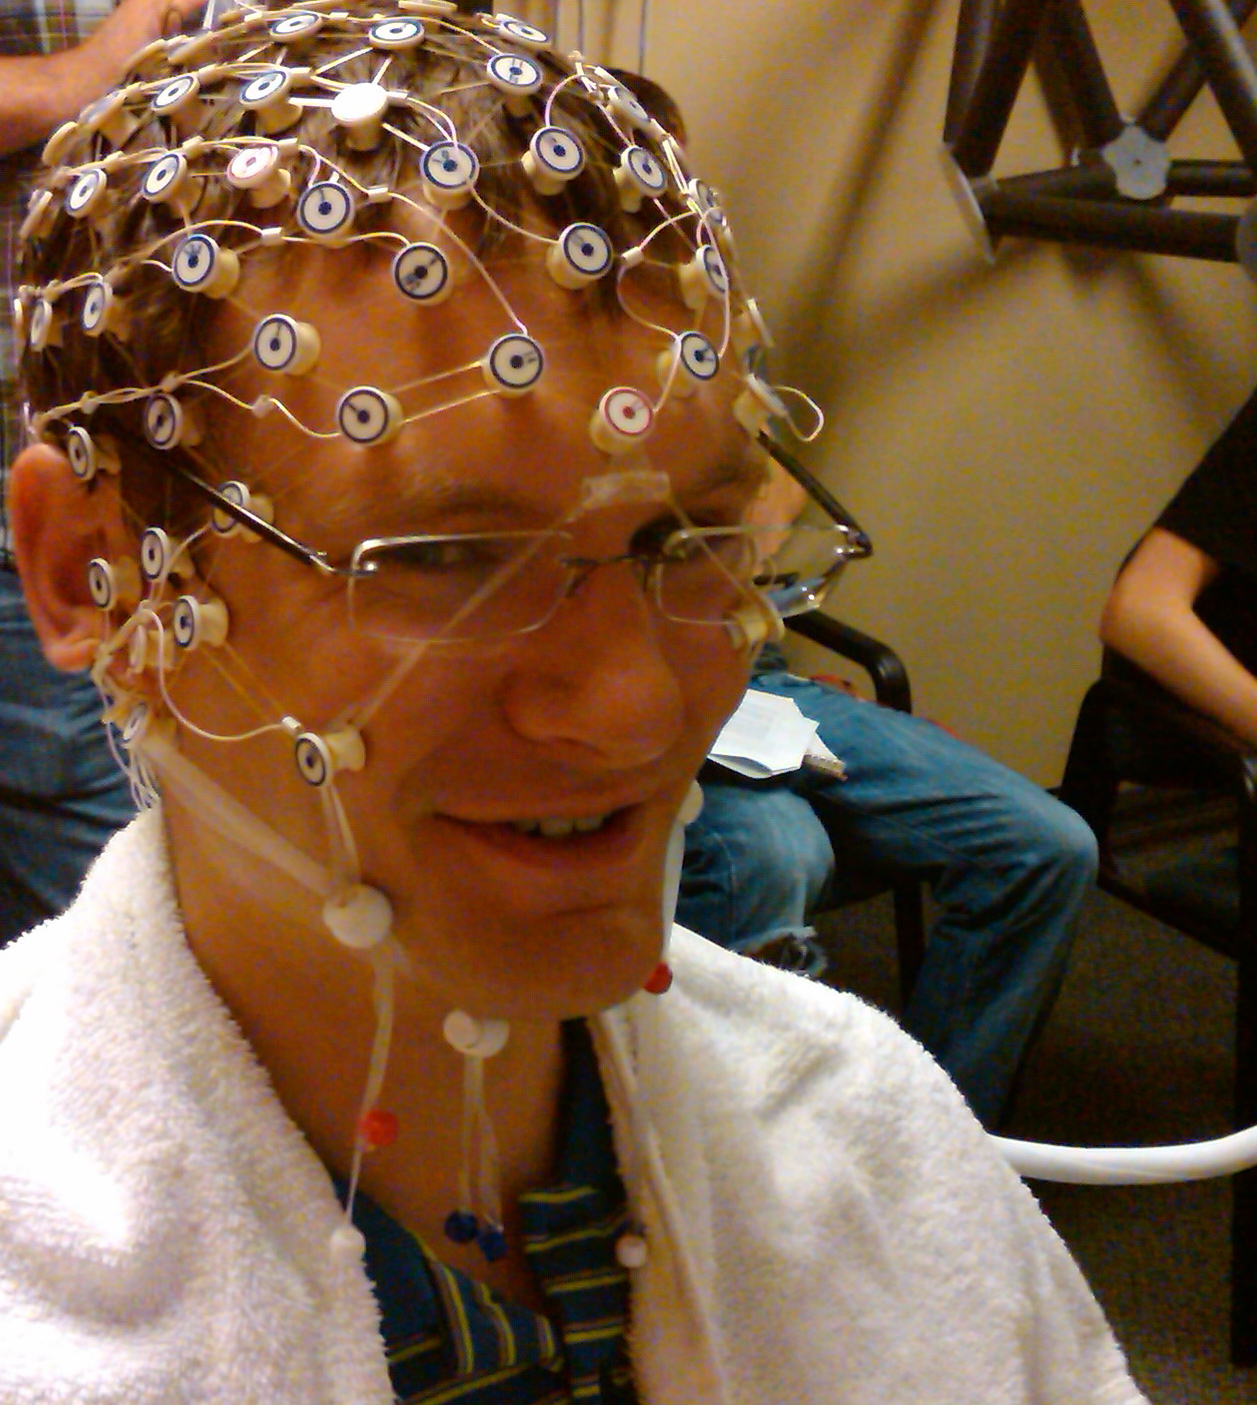 Man in lab with nodes on head